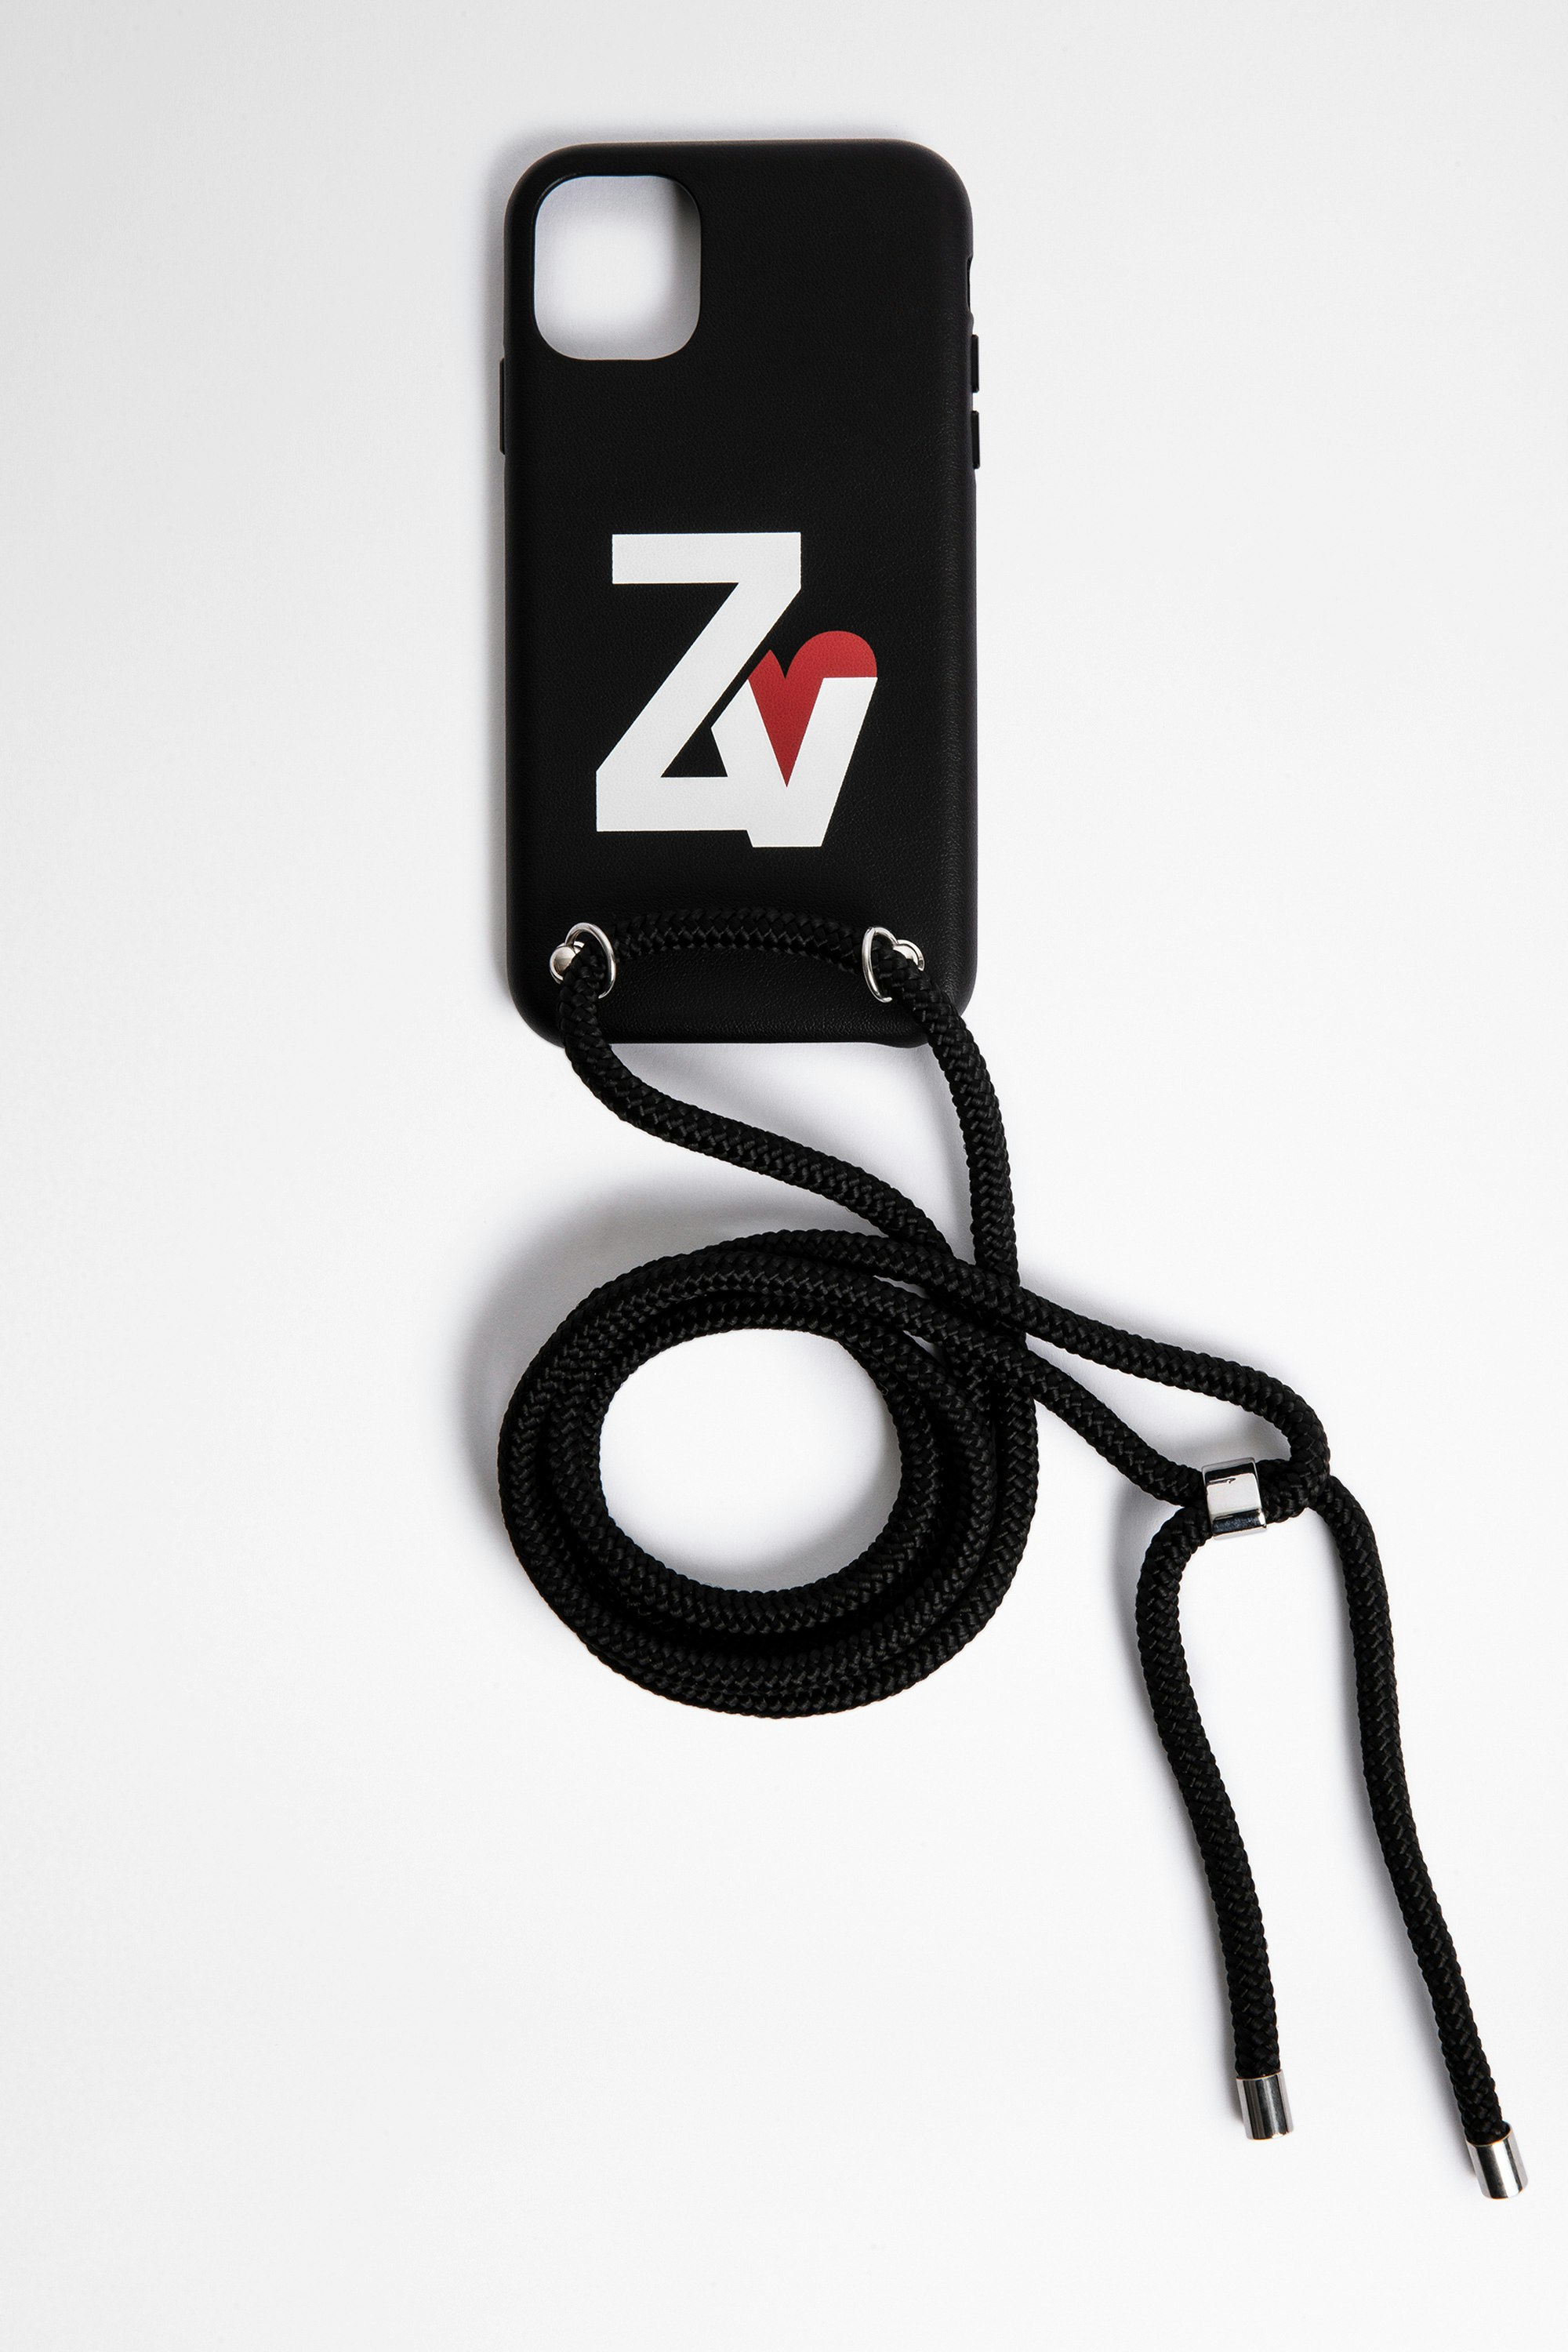 ZV Crush iPhone 11 ケース iPhone 11 case with shoulder strap in black